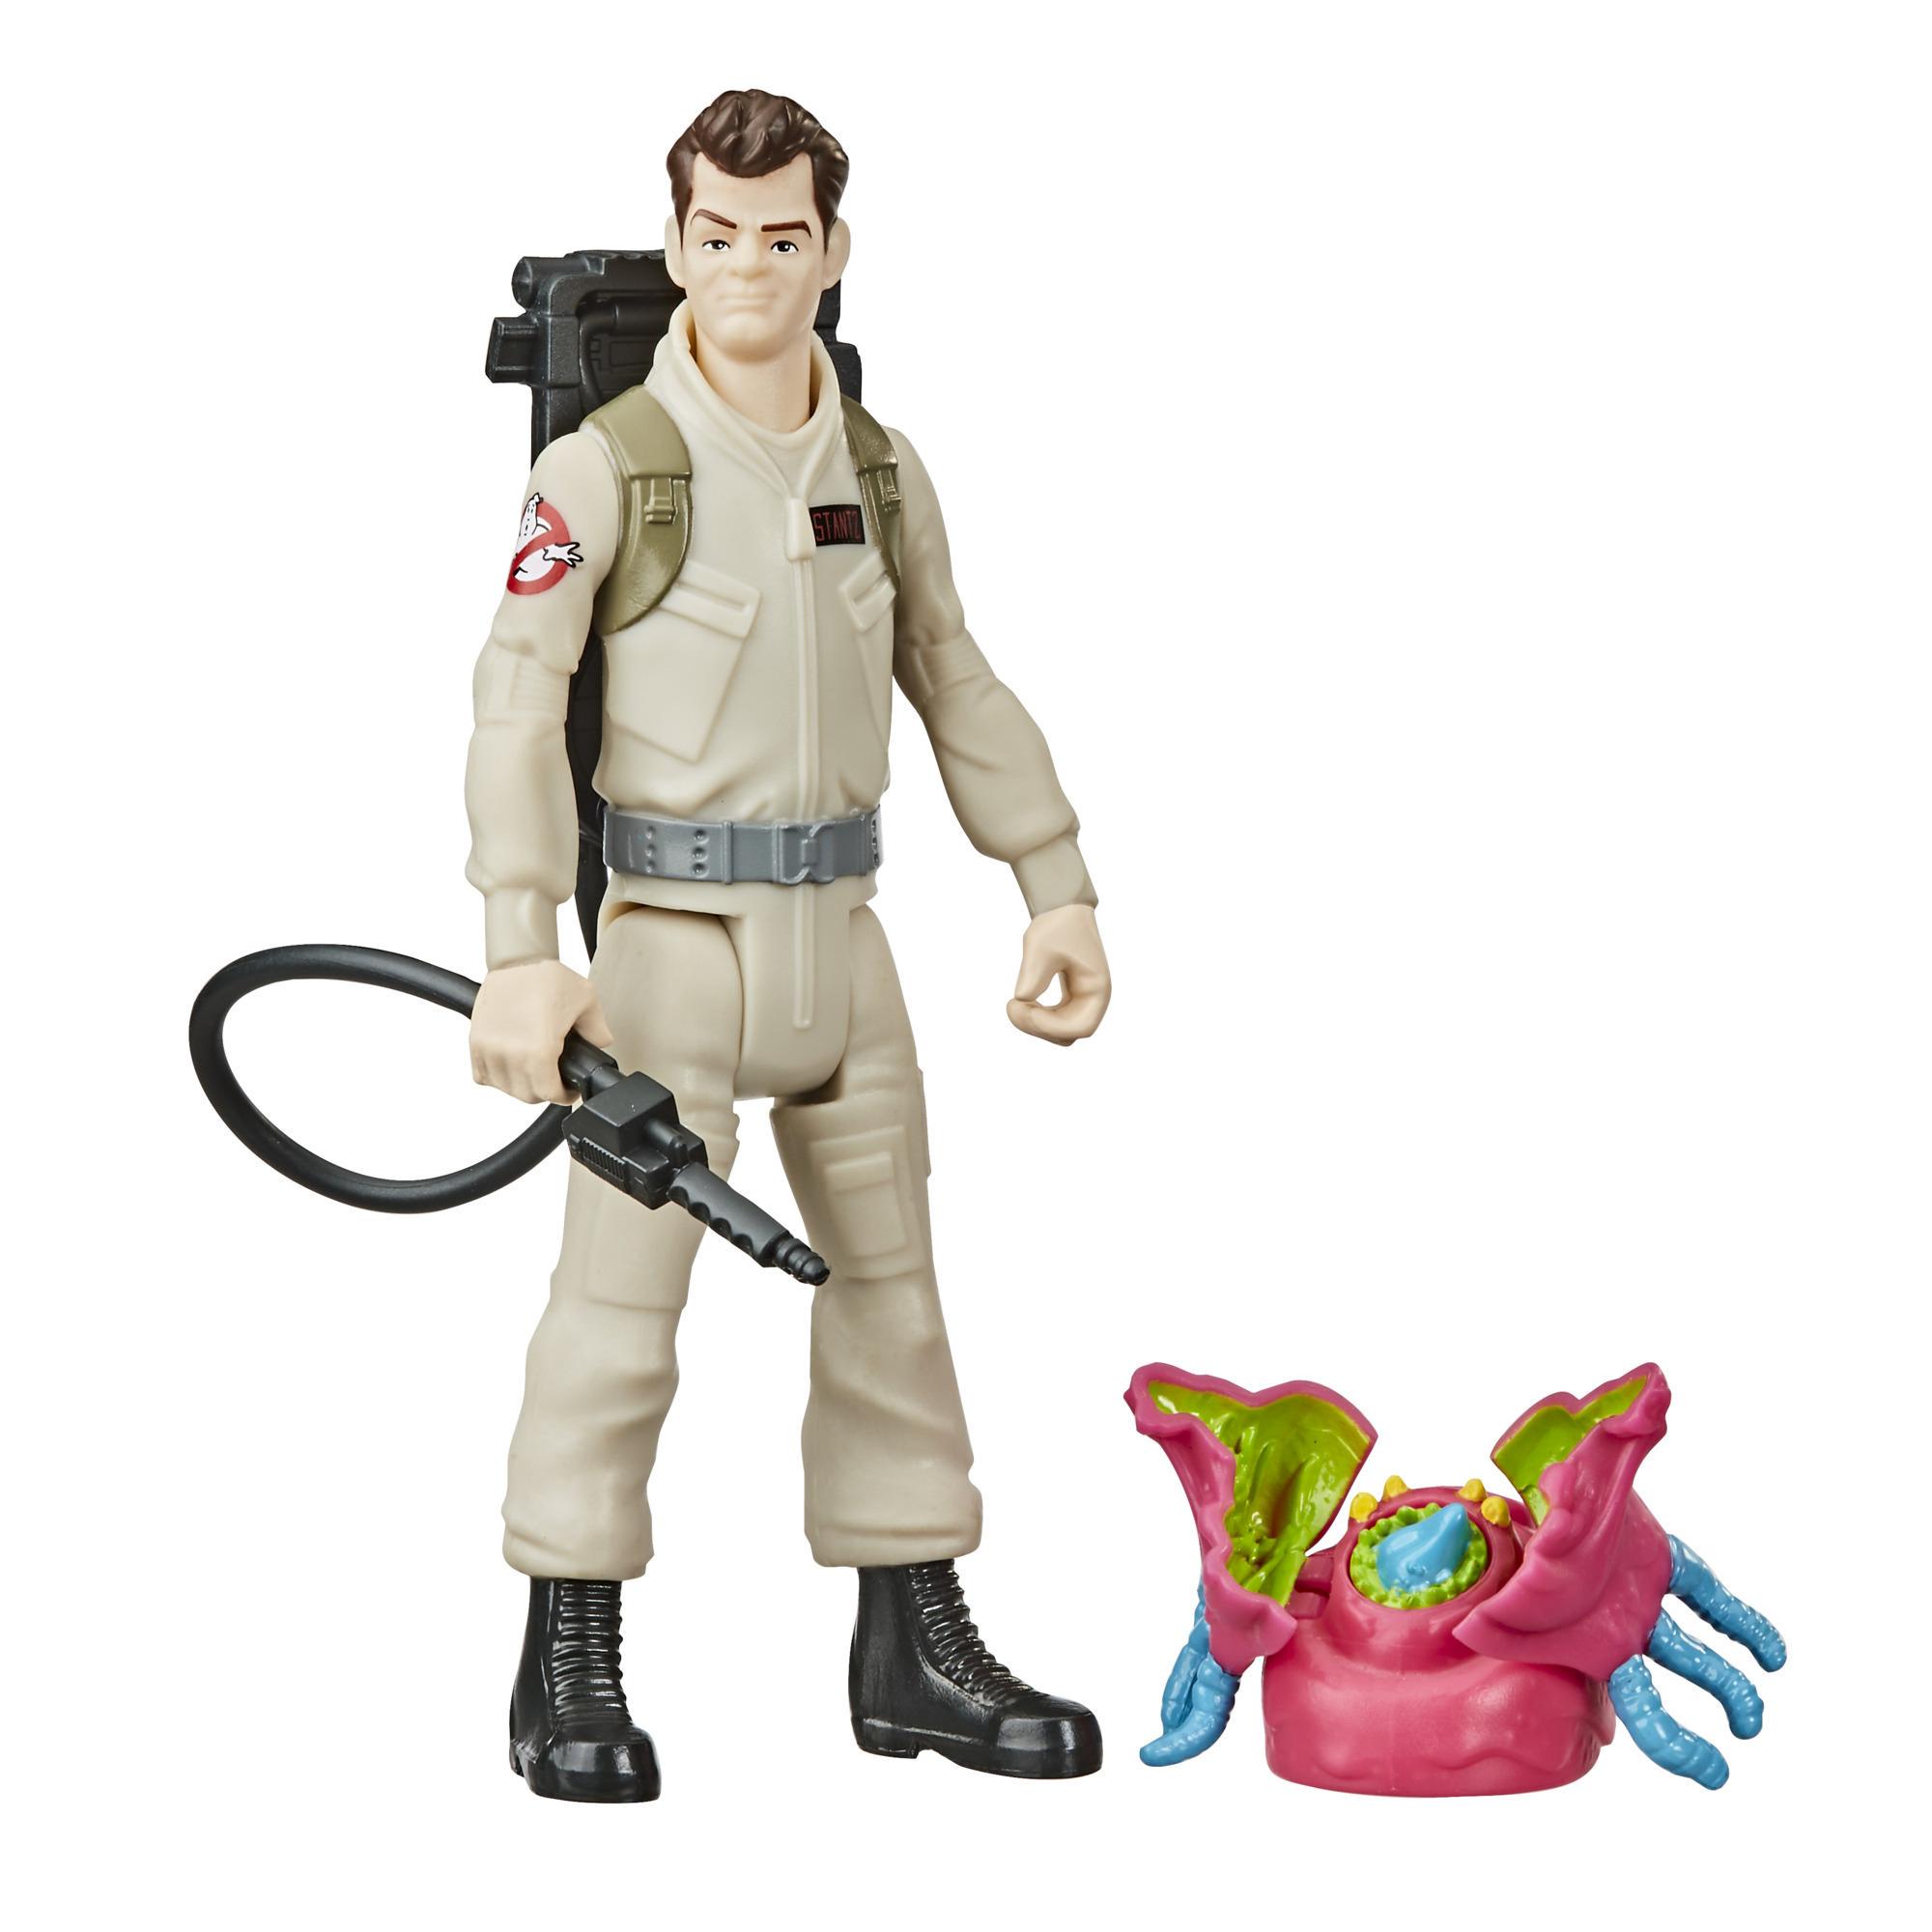 Ghostbusters, Figurine Grand frisson Ray Stantz product thumbnail 1